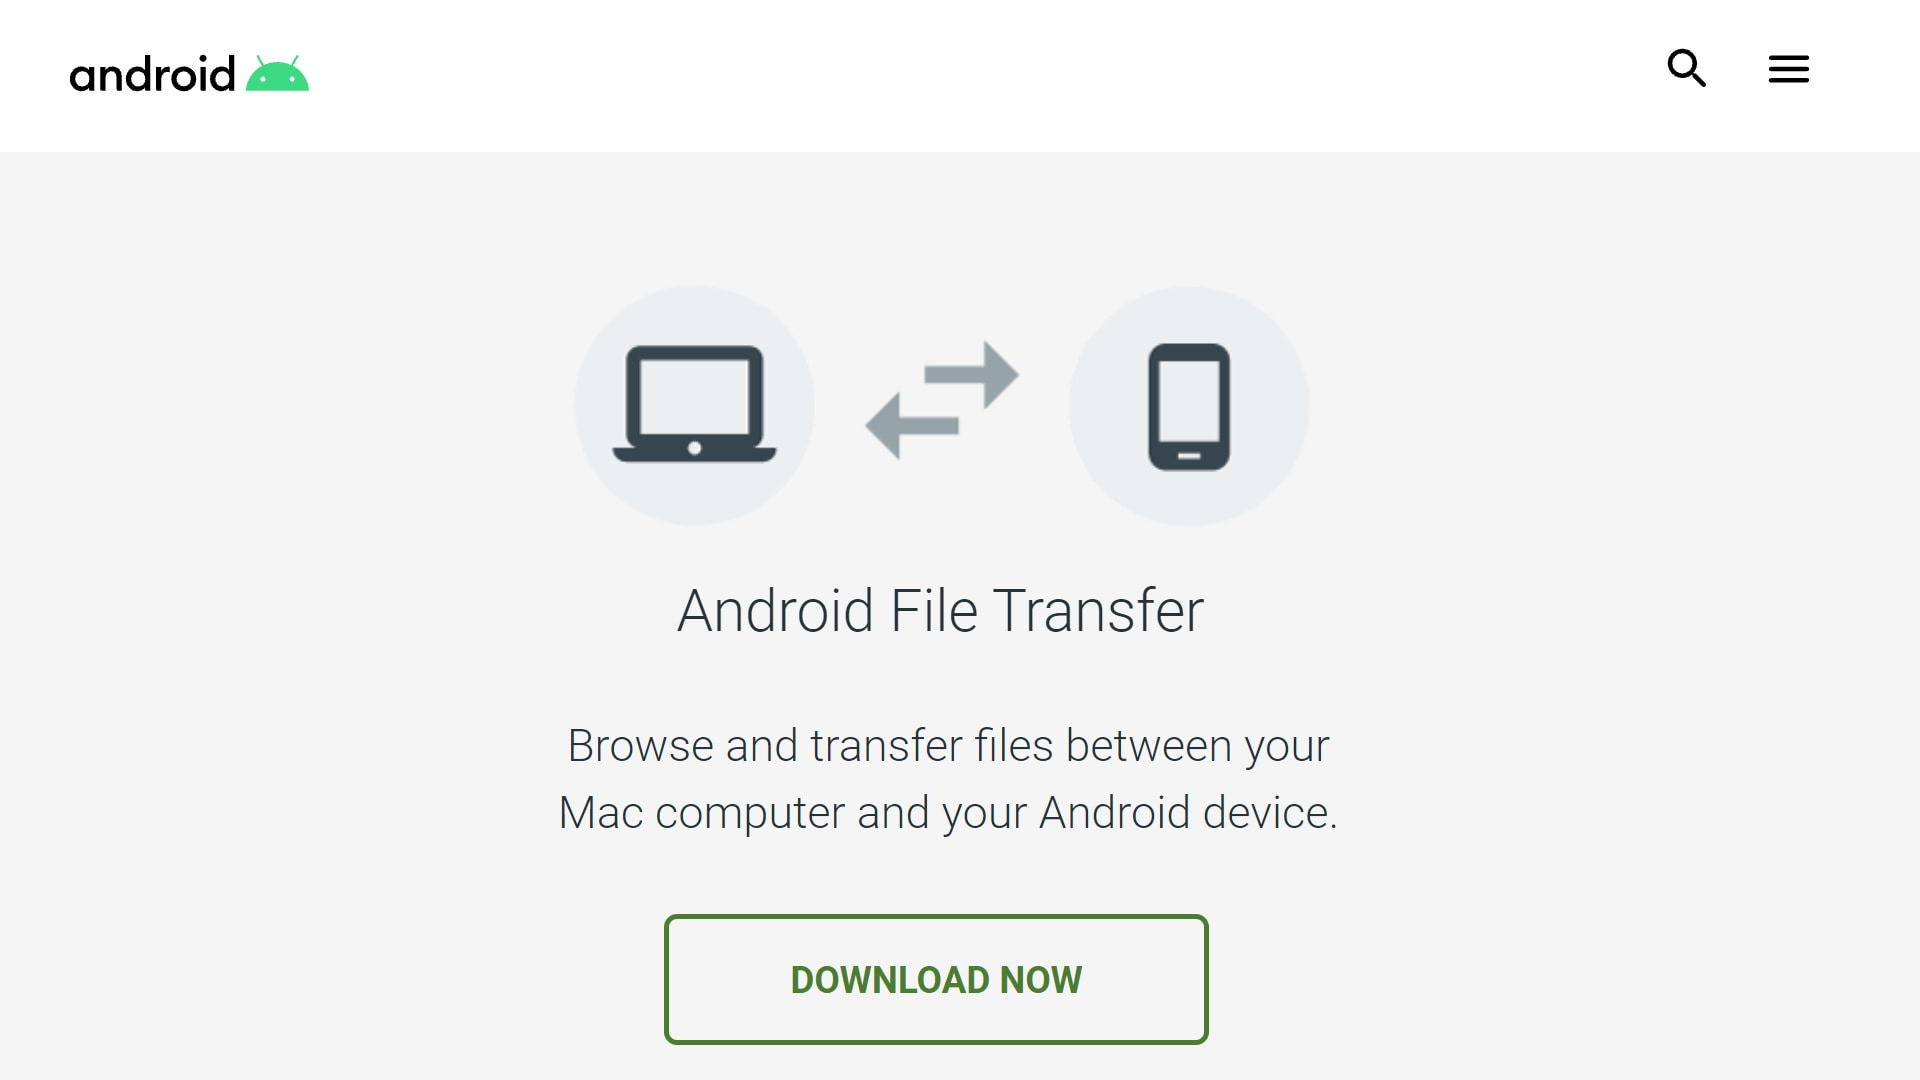 Go to Launchpad and find the Android File Transfer icon there.